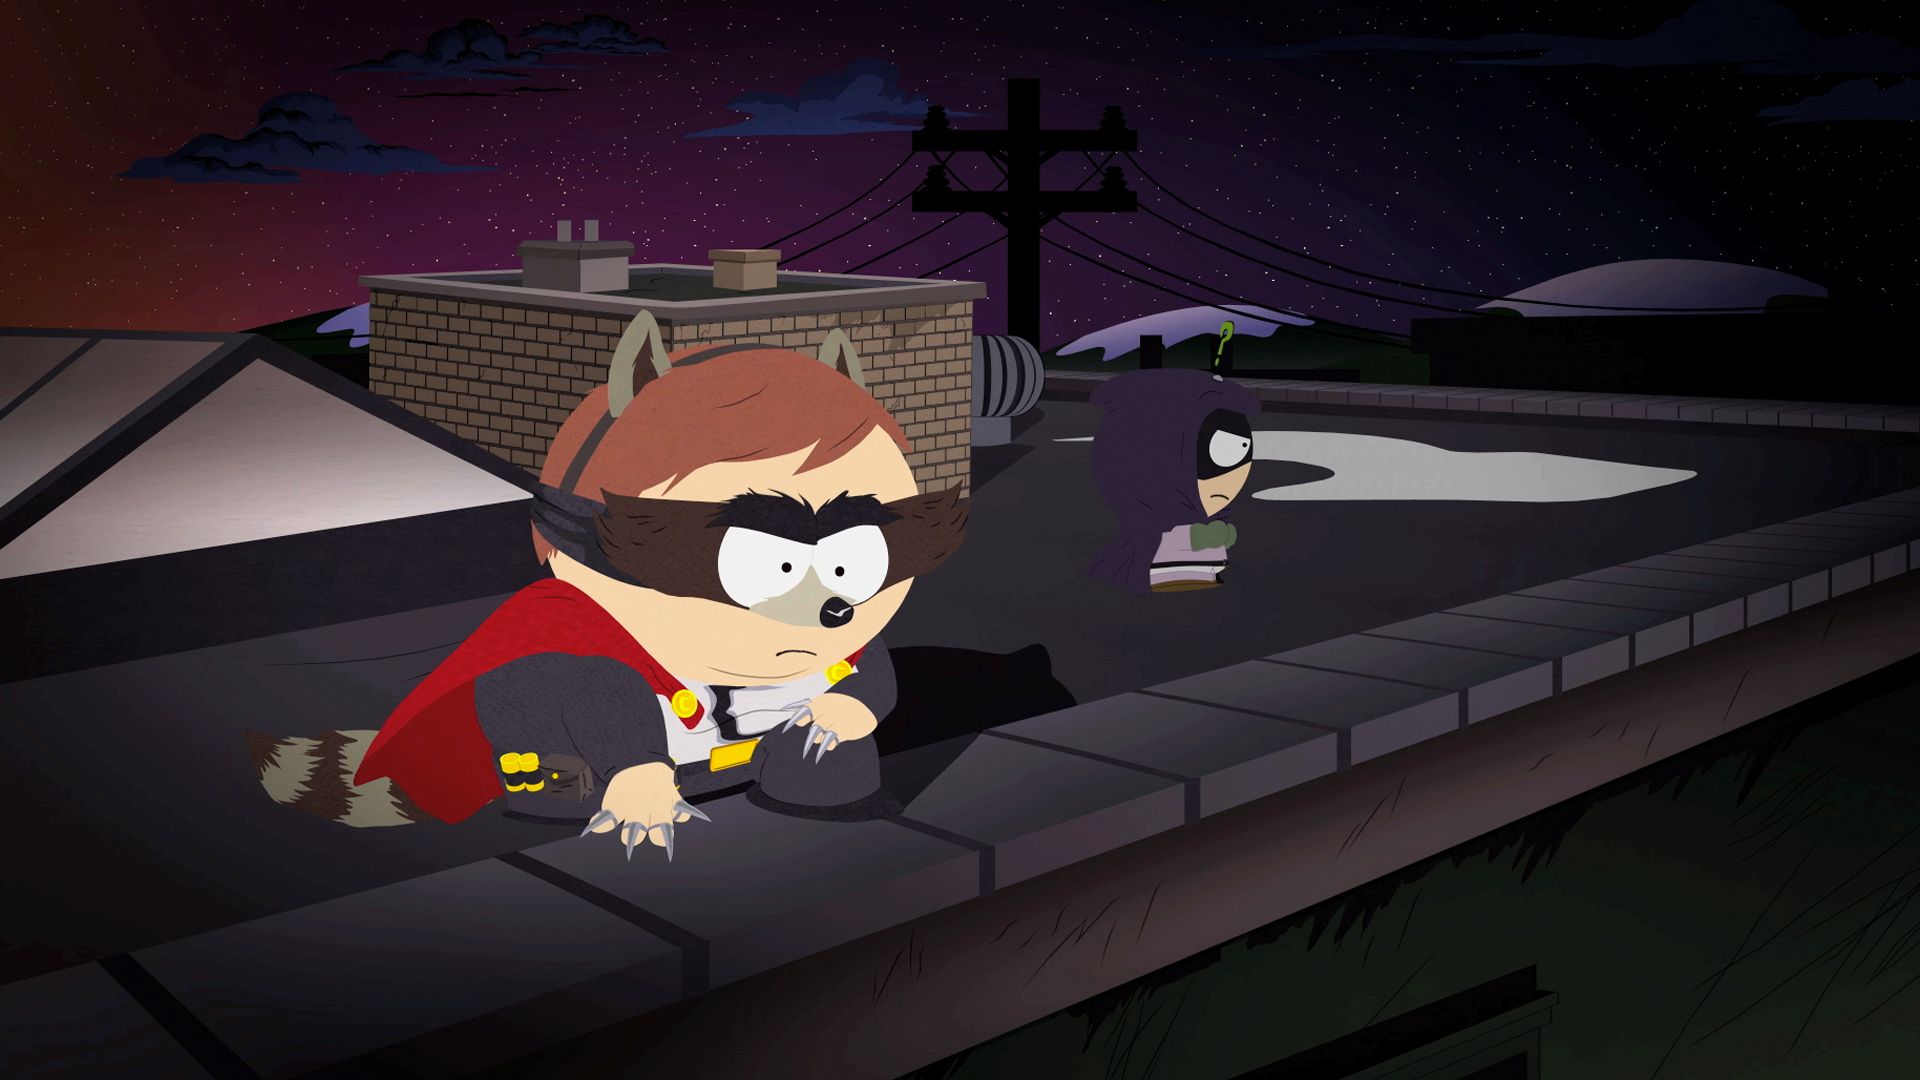 The Symbol This Town Needs - Season 13 Episode 2 - South Park